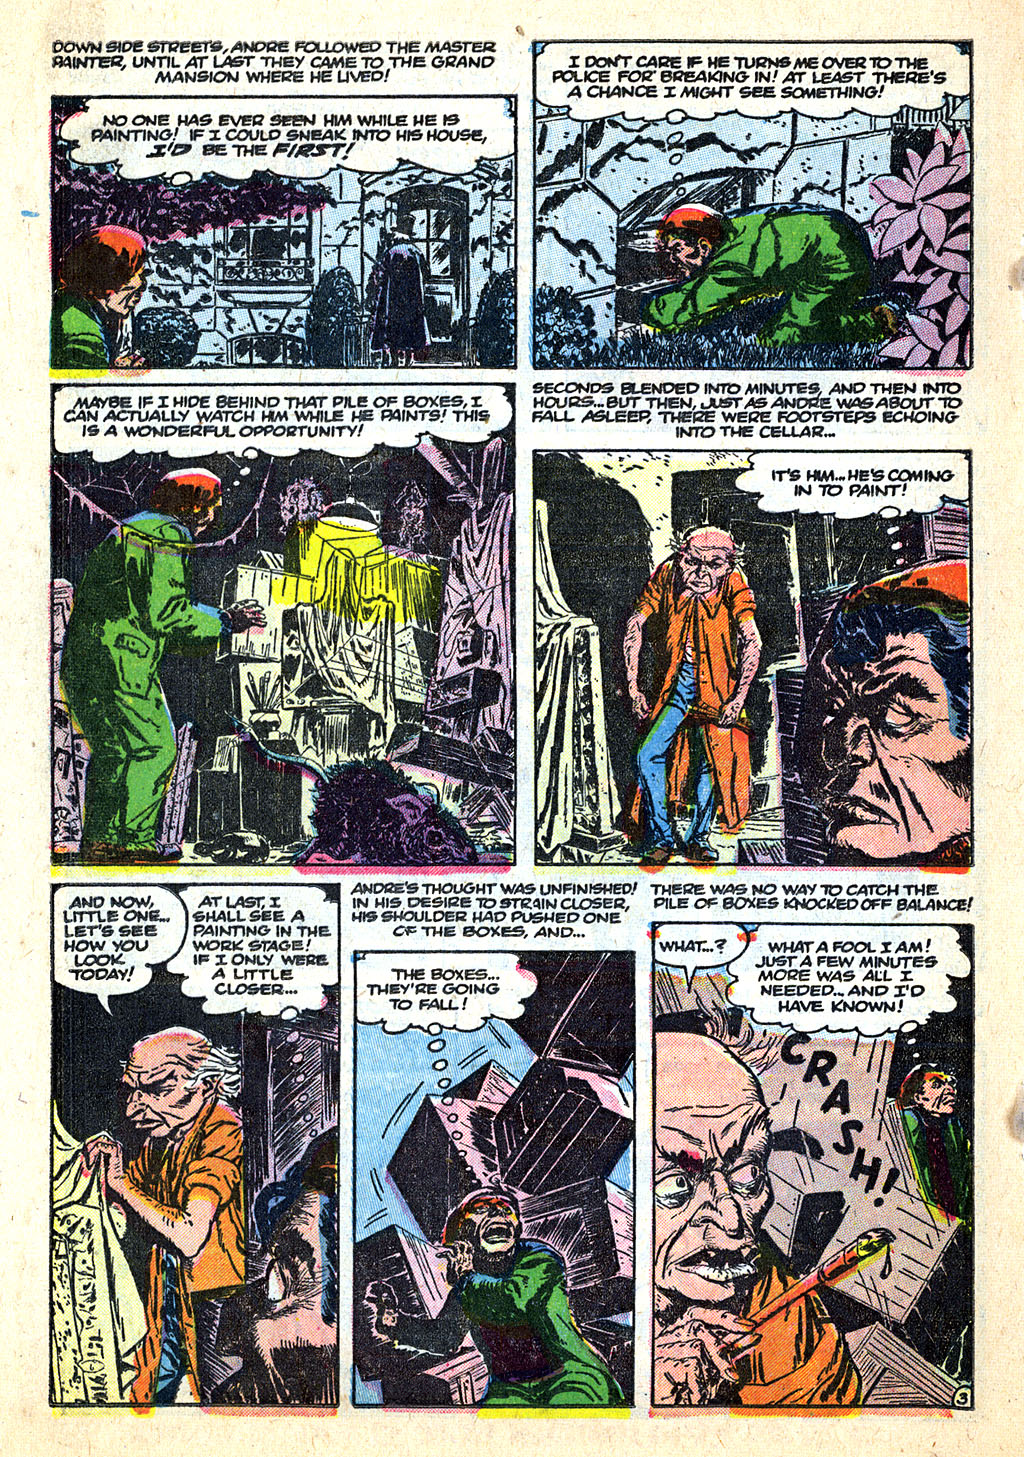 Marvel Tales (1949) 127 Page 23